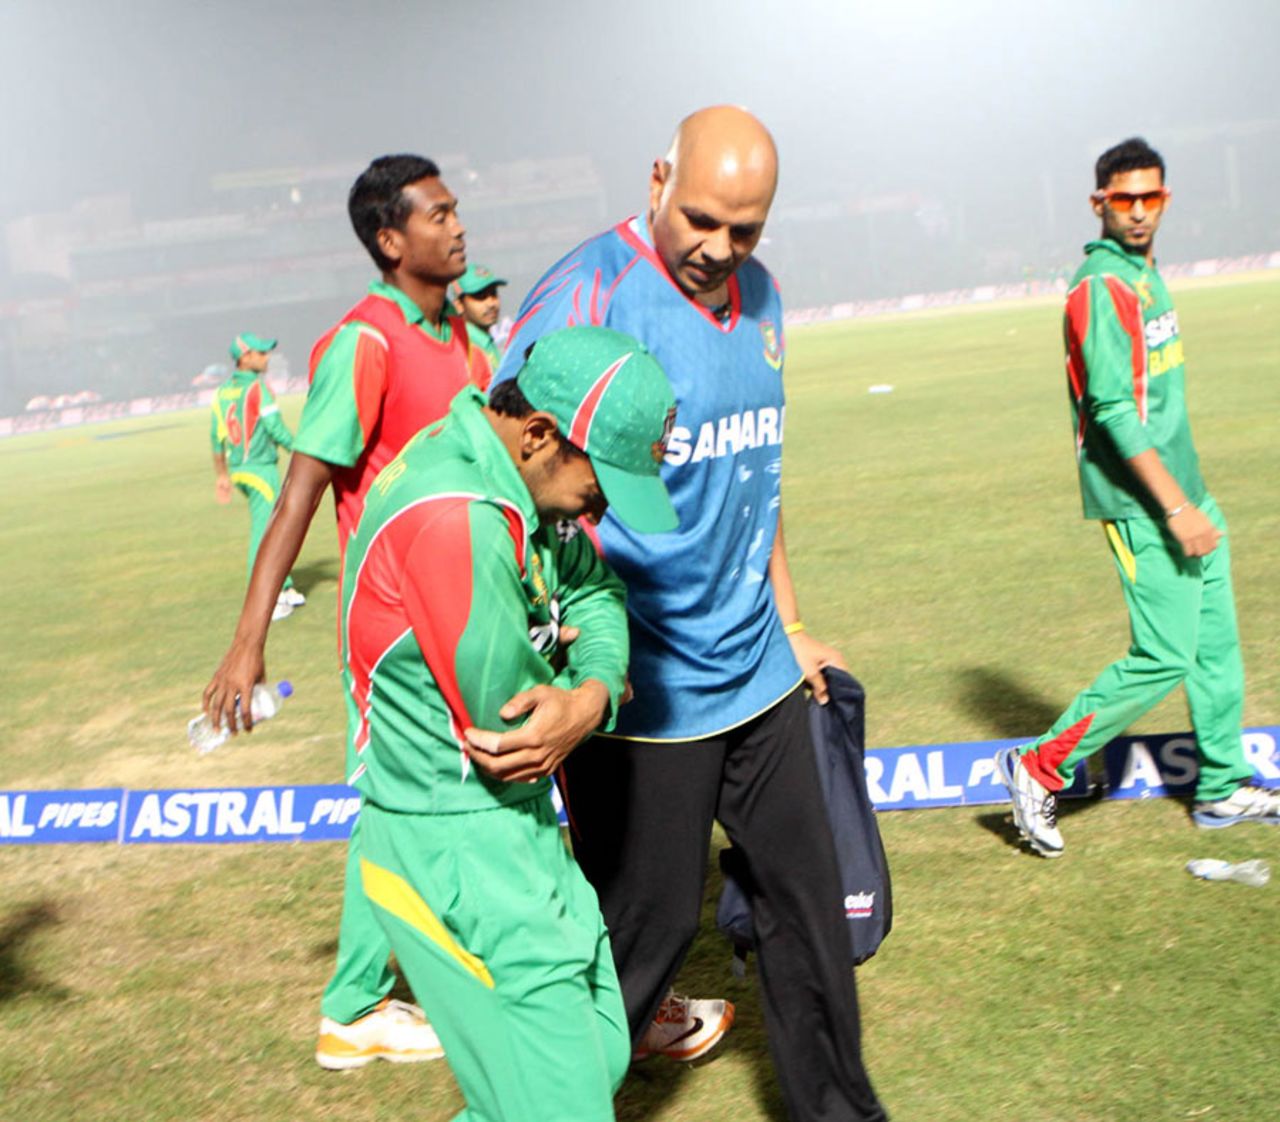 Mushfiqur Rahim left the field after hurting his right shoulder, Bangladesh v India, Asia Cup 2014, Fatullah, February 26, 2014